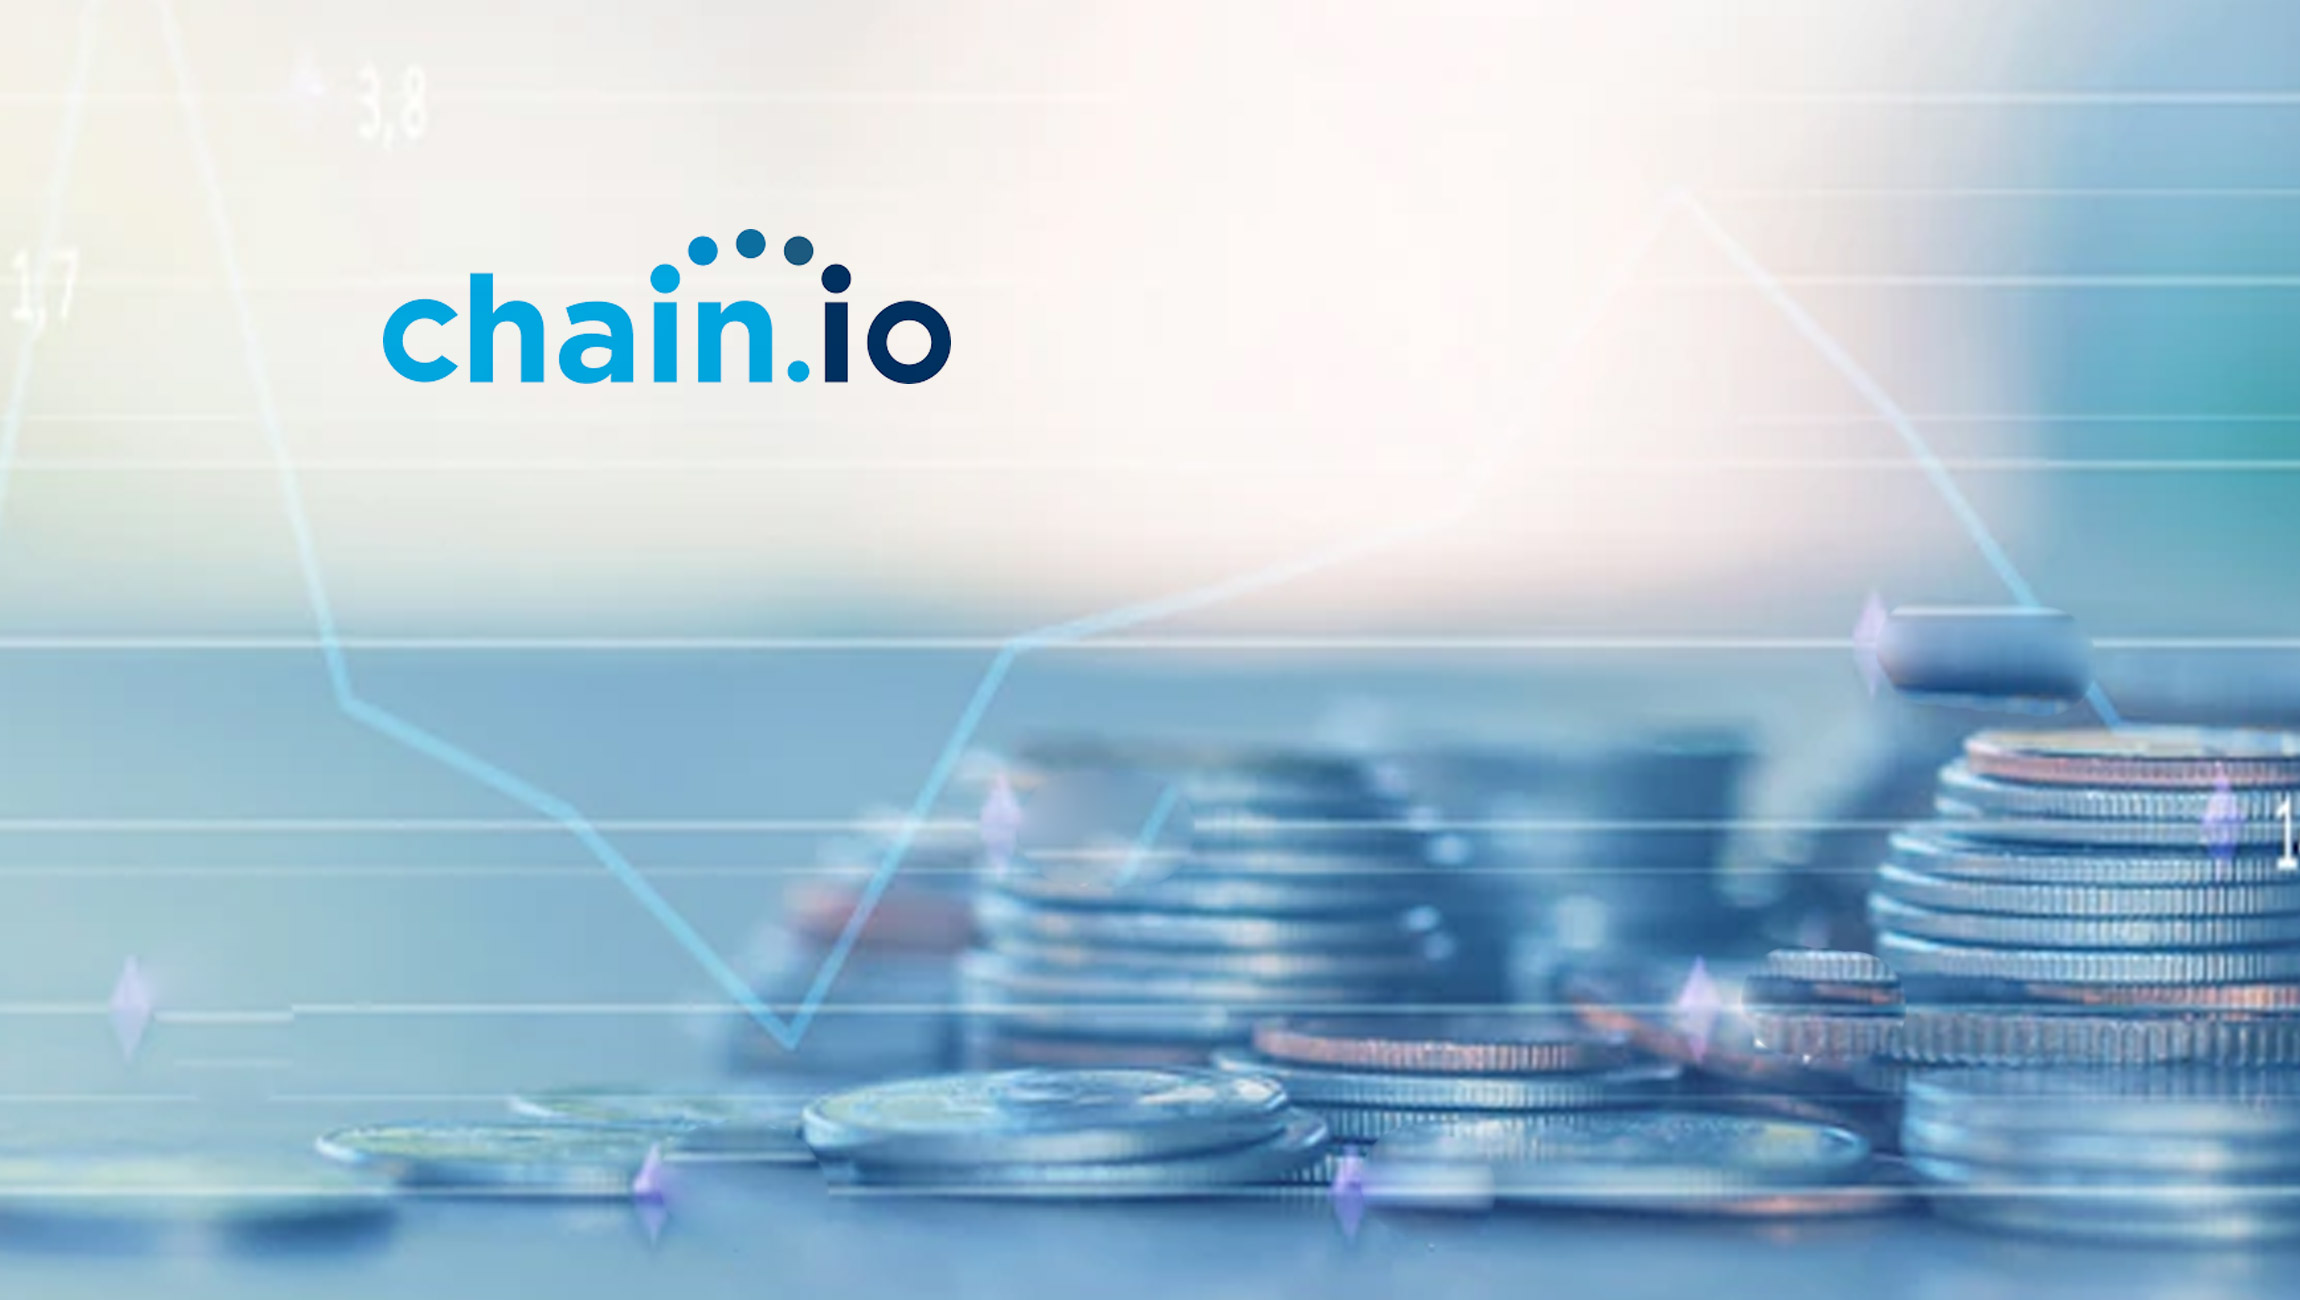 Chain.io Closes $11M Series A Financing to Deliver Better Data Integration and Visibility Across the Global Supply Chain